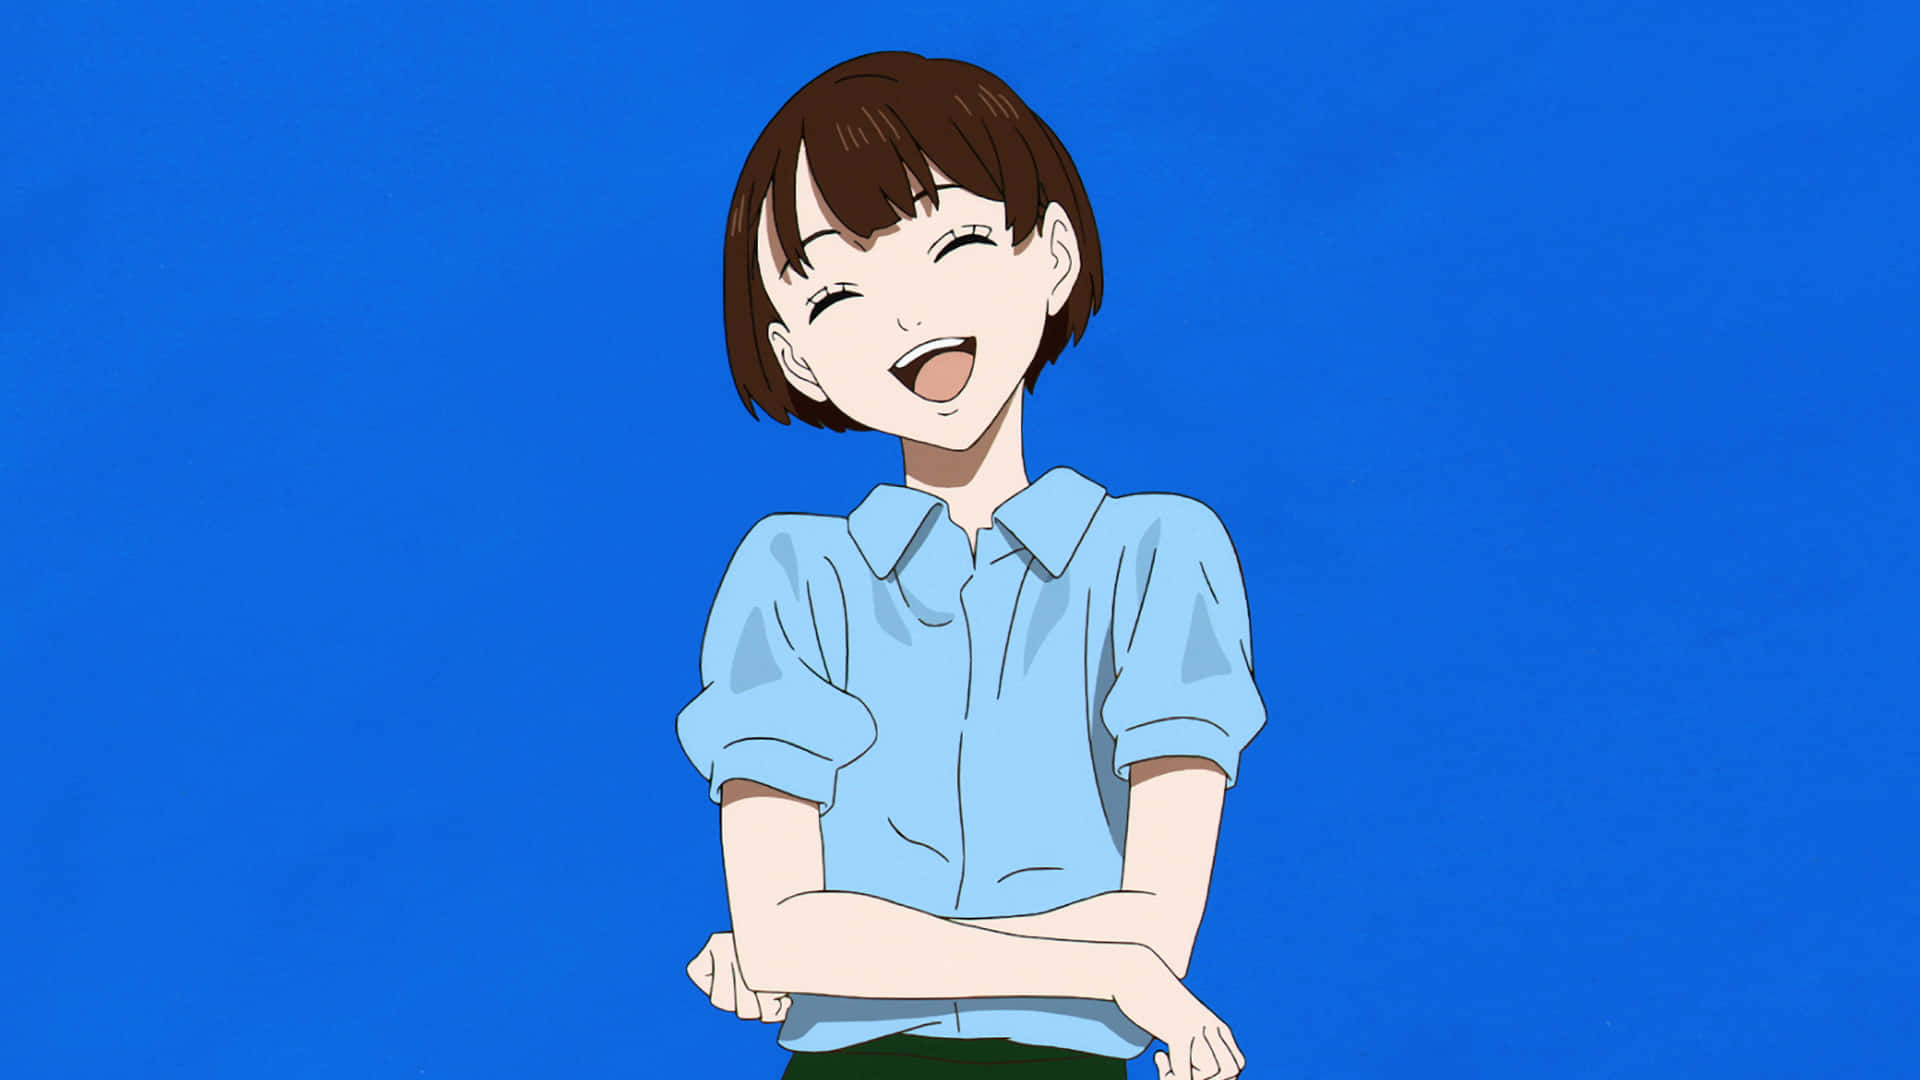 A Girl In A Blue Shirt Is Standing With Her Arms Crossed